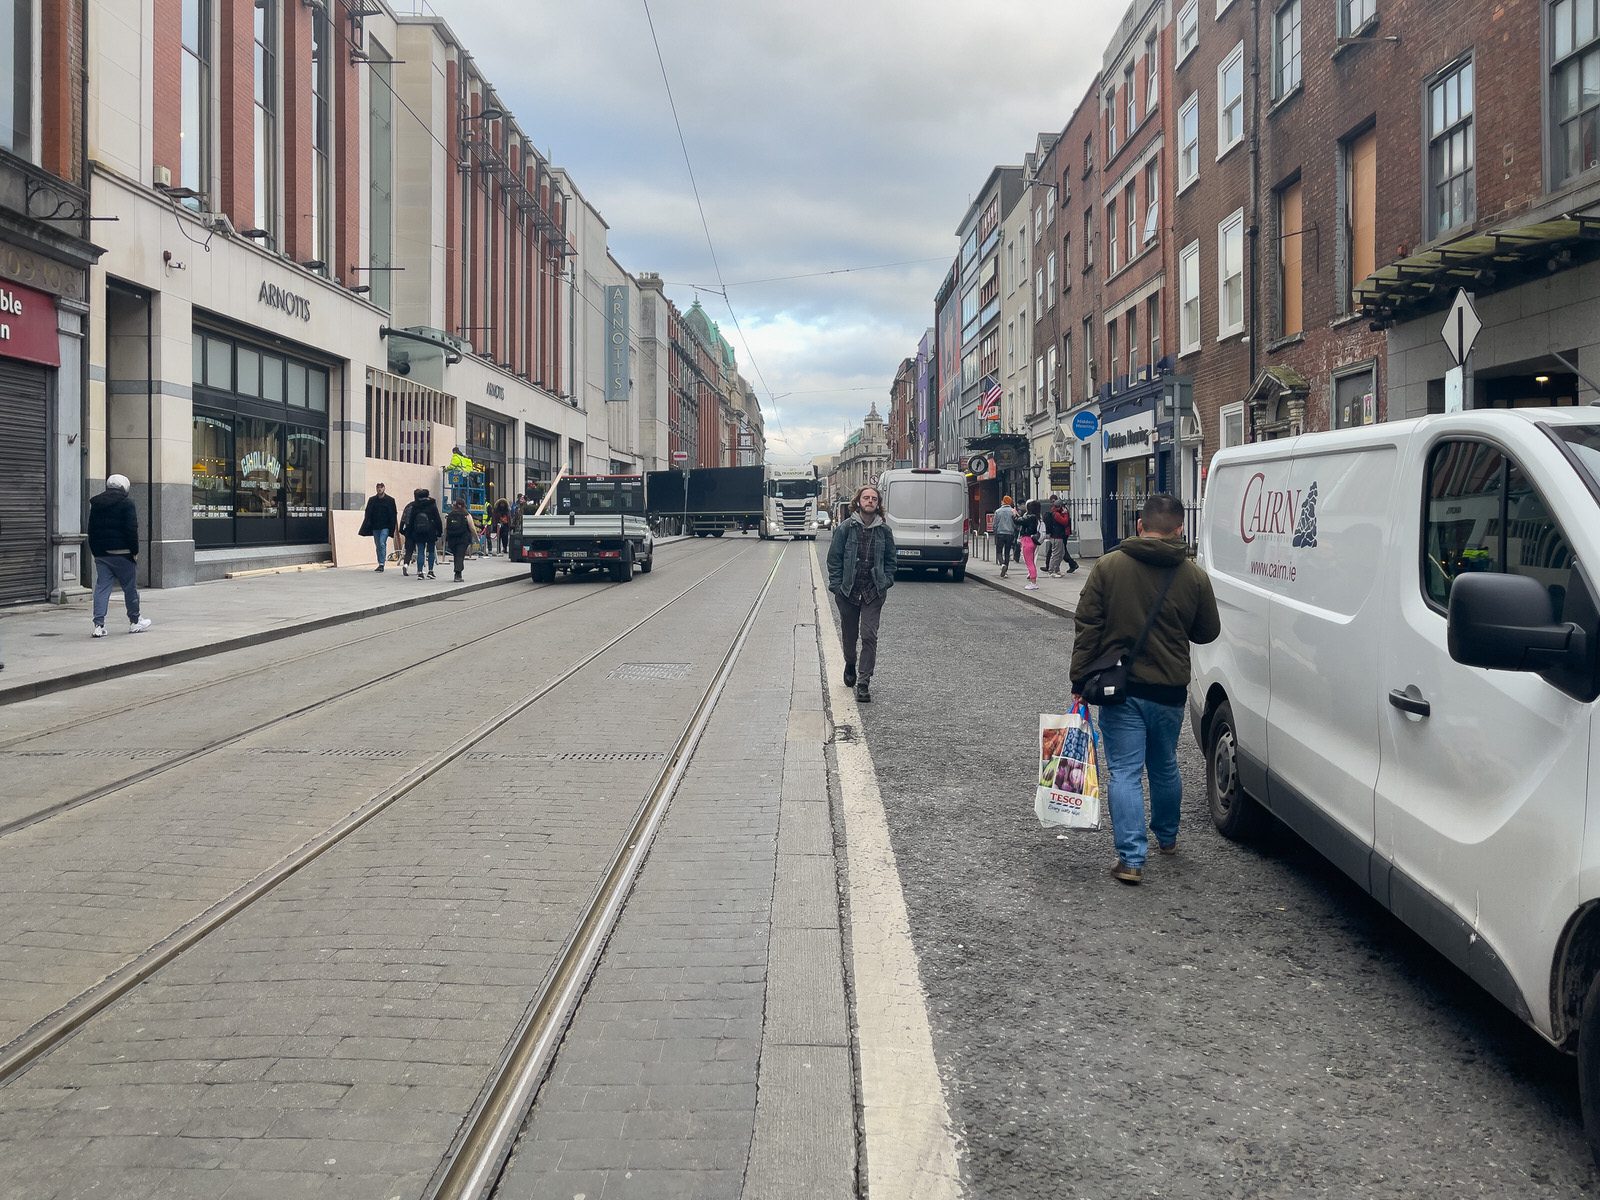 DUBLIN CITY CENTRE [THE DAY AFTER THE RIOT AND LITTLE TO SEE]-225279-1